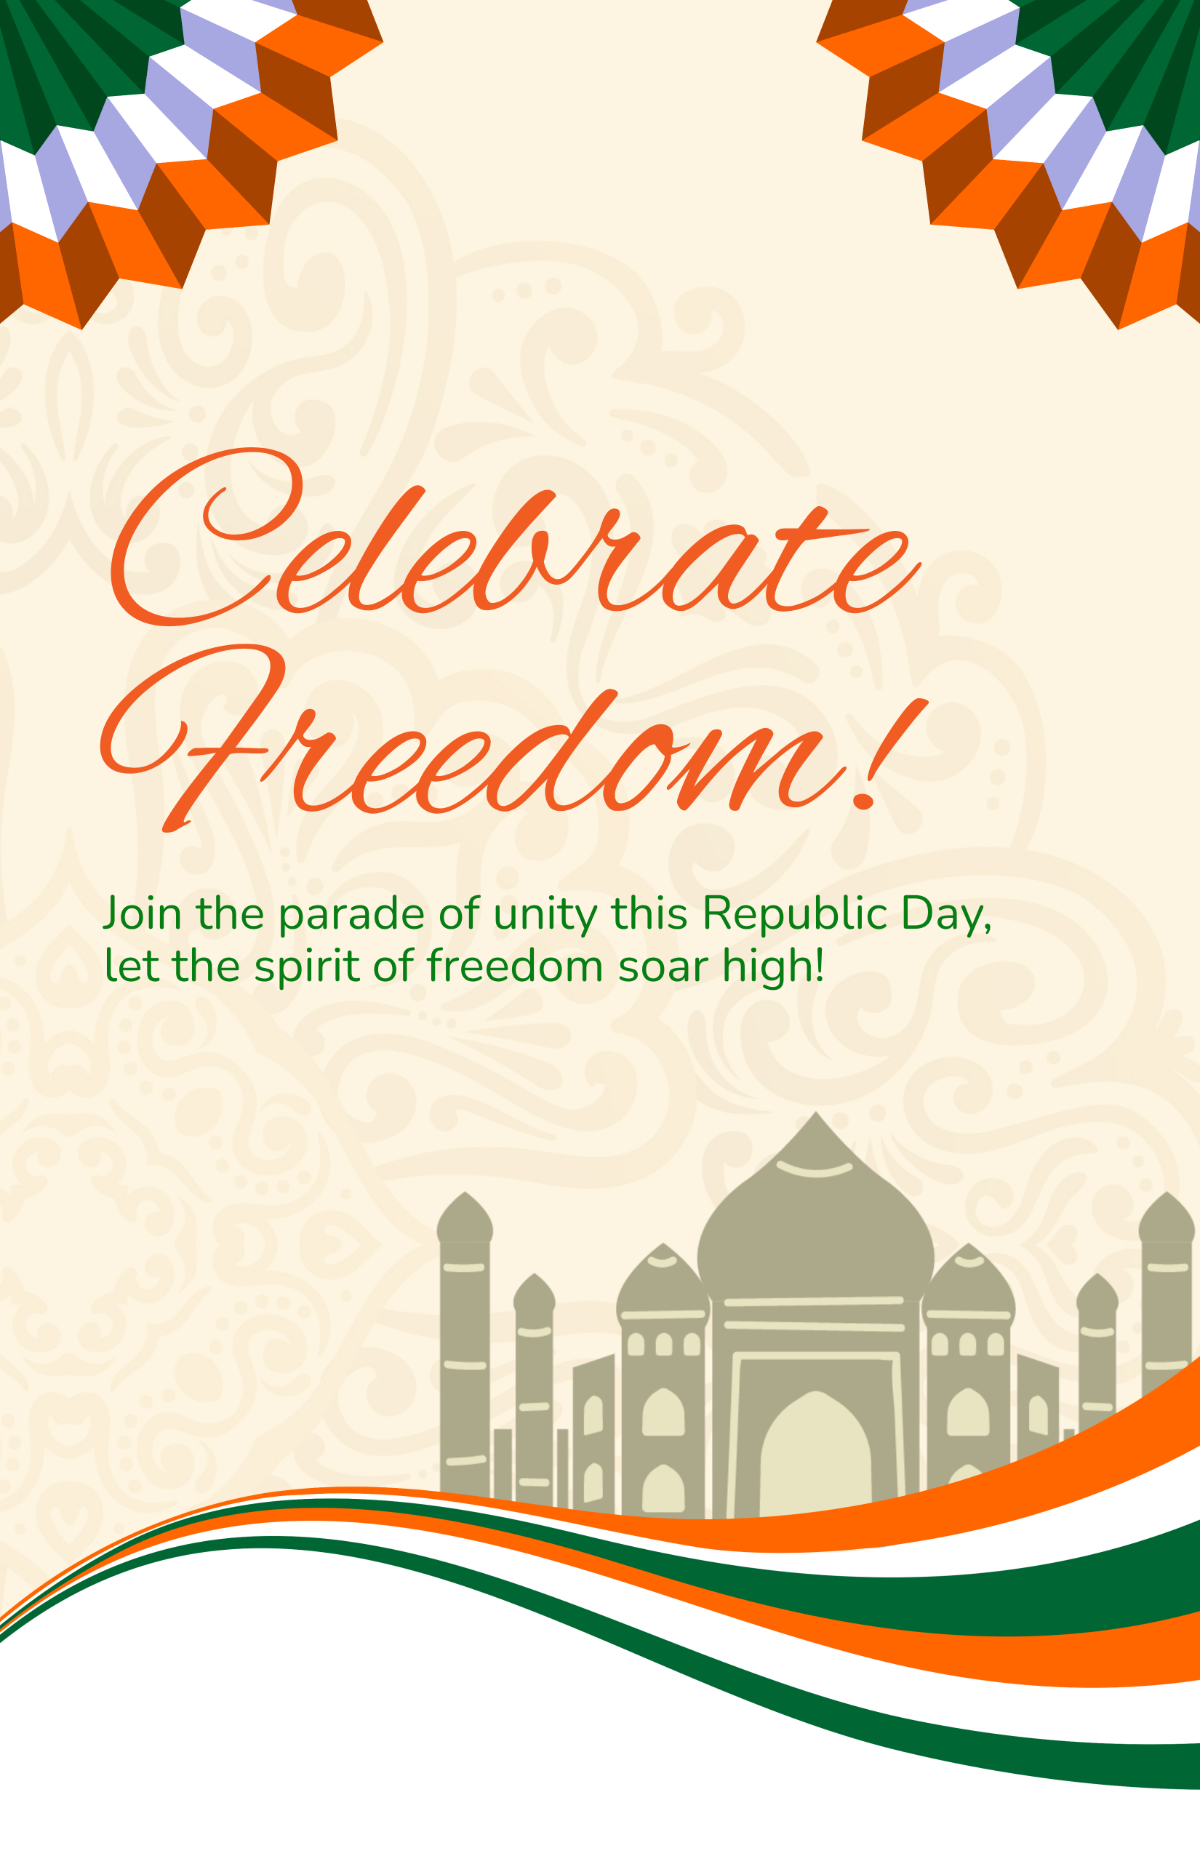 Free Republic Day Parade Poster Template